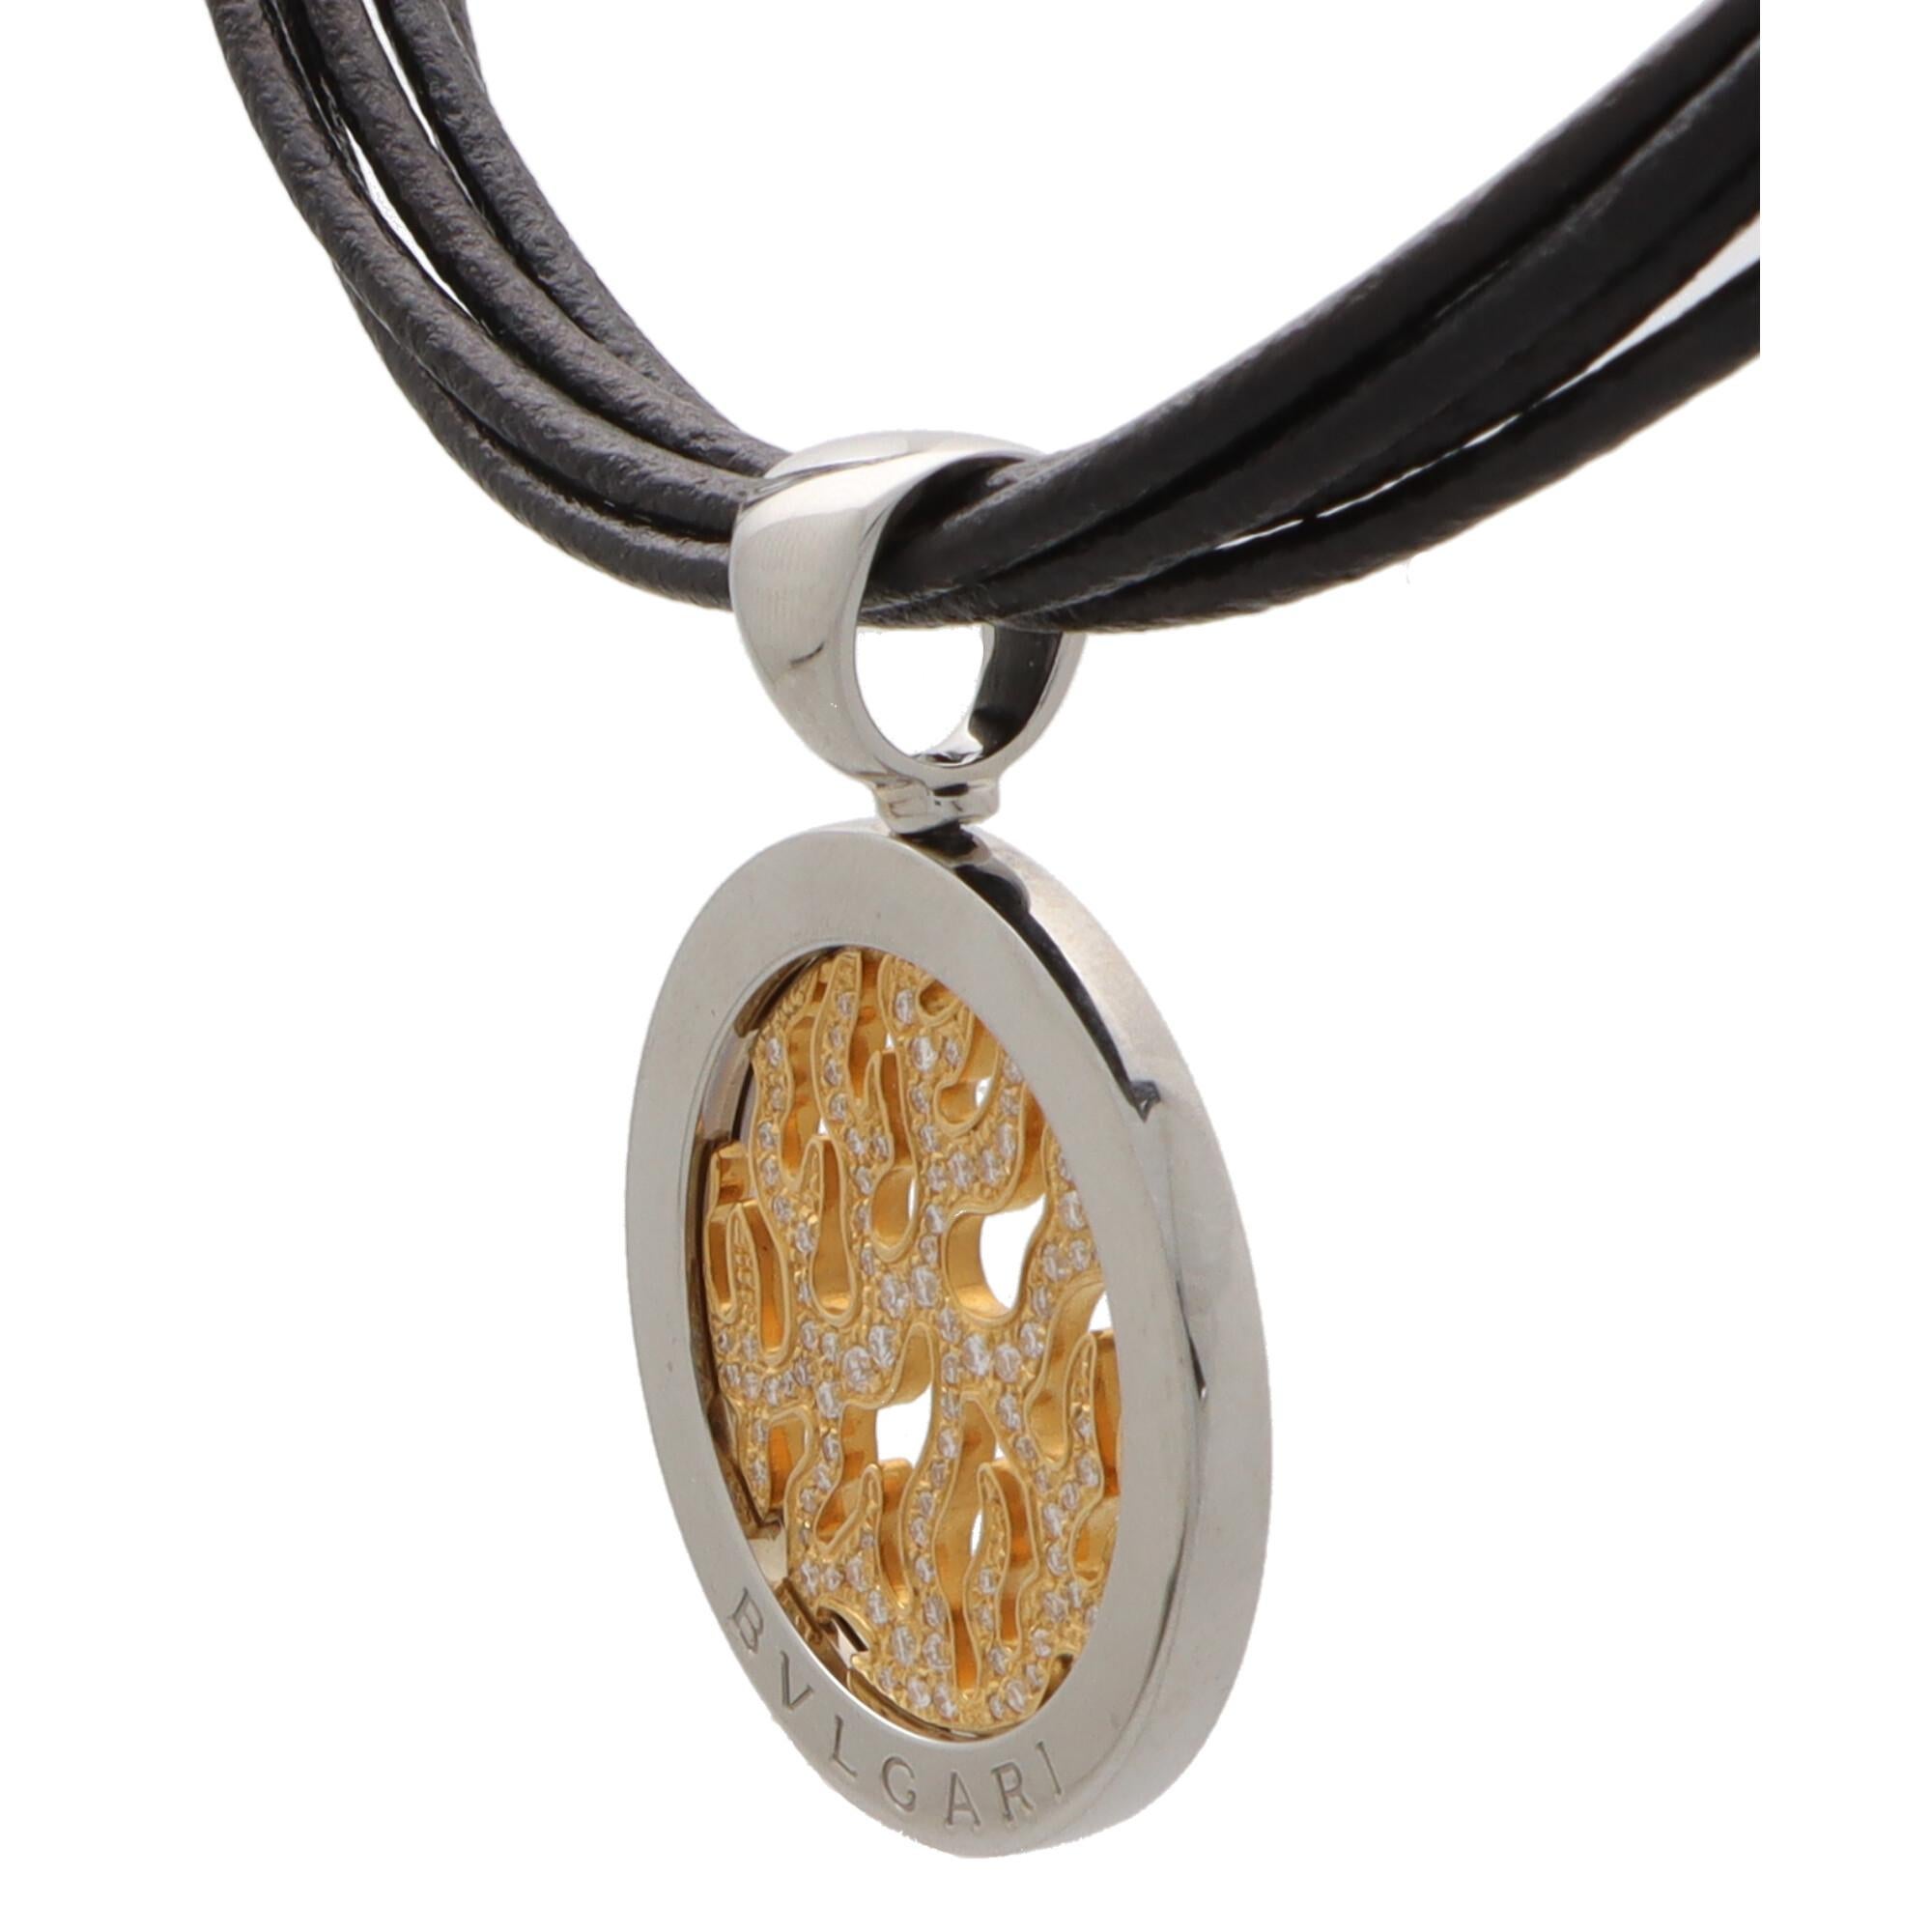 Modern Bvlgari Tondo Fire Diamond Pendant in Steel and Yellow Gold with Leather Chain